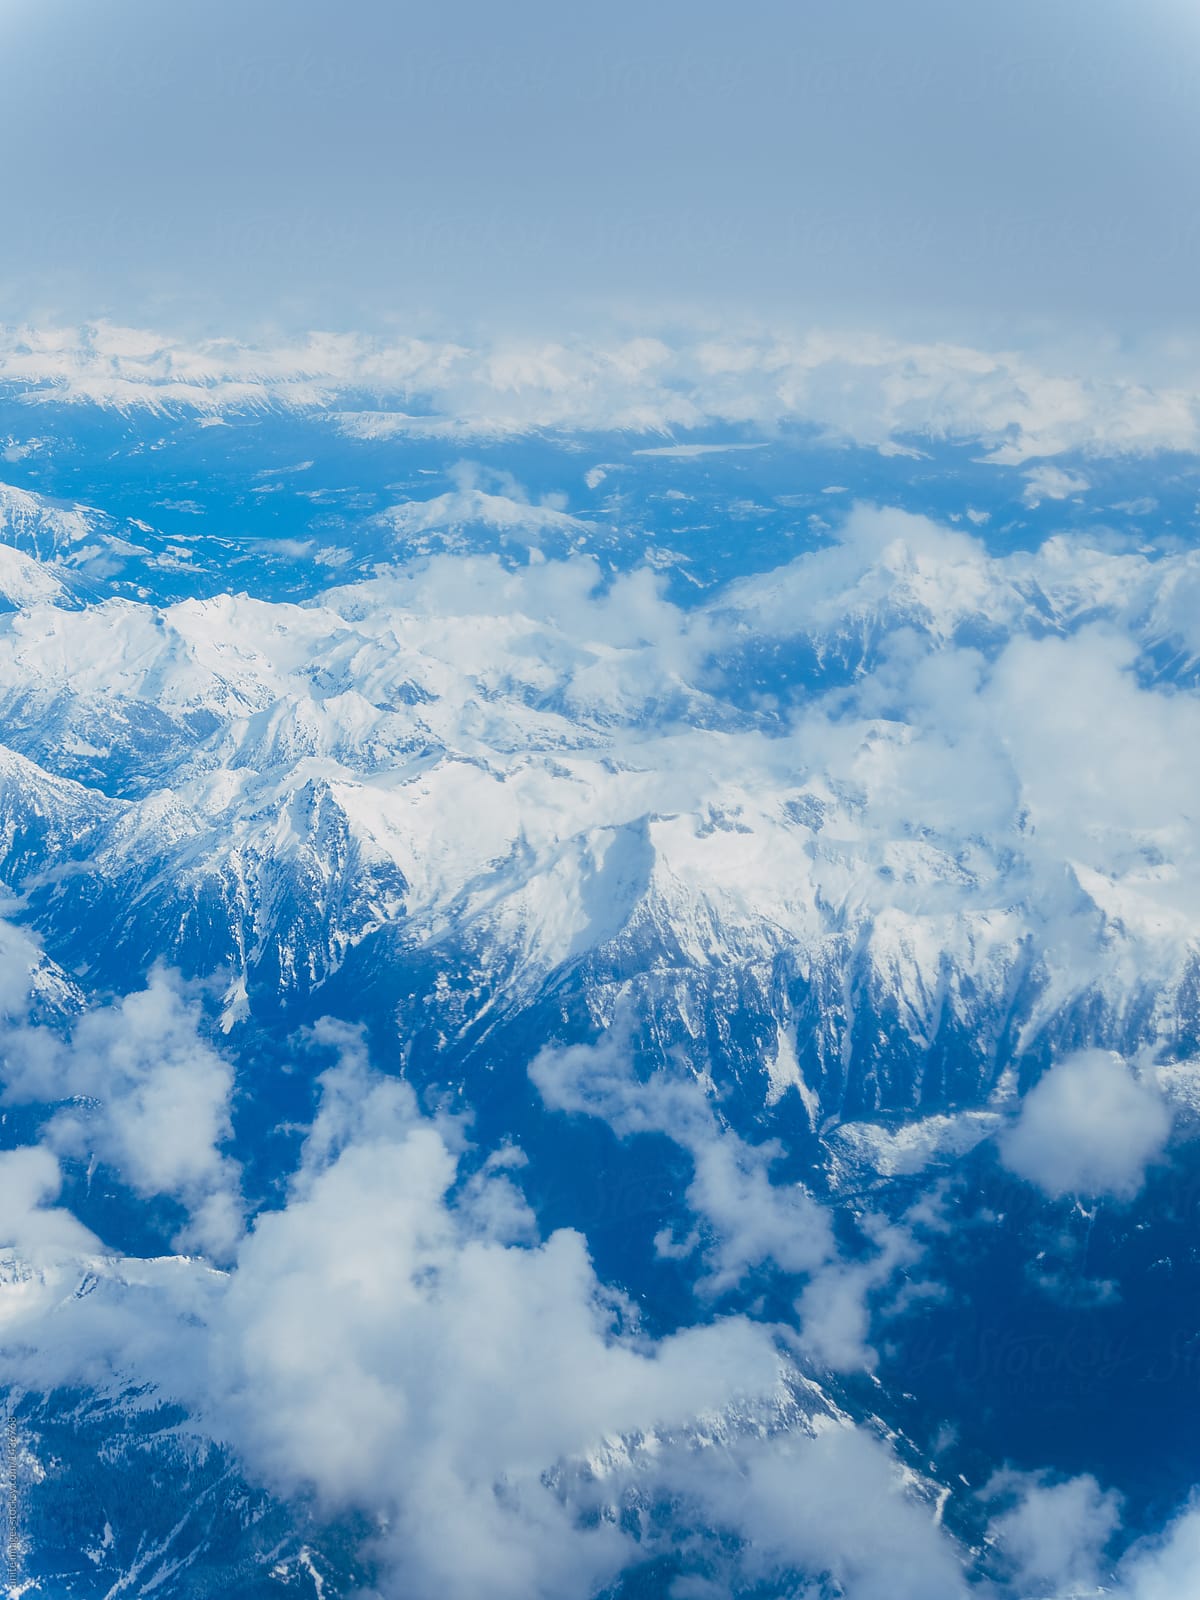 bird view of range of snow-capped mountains,Vancouver